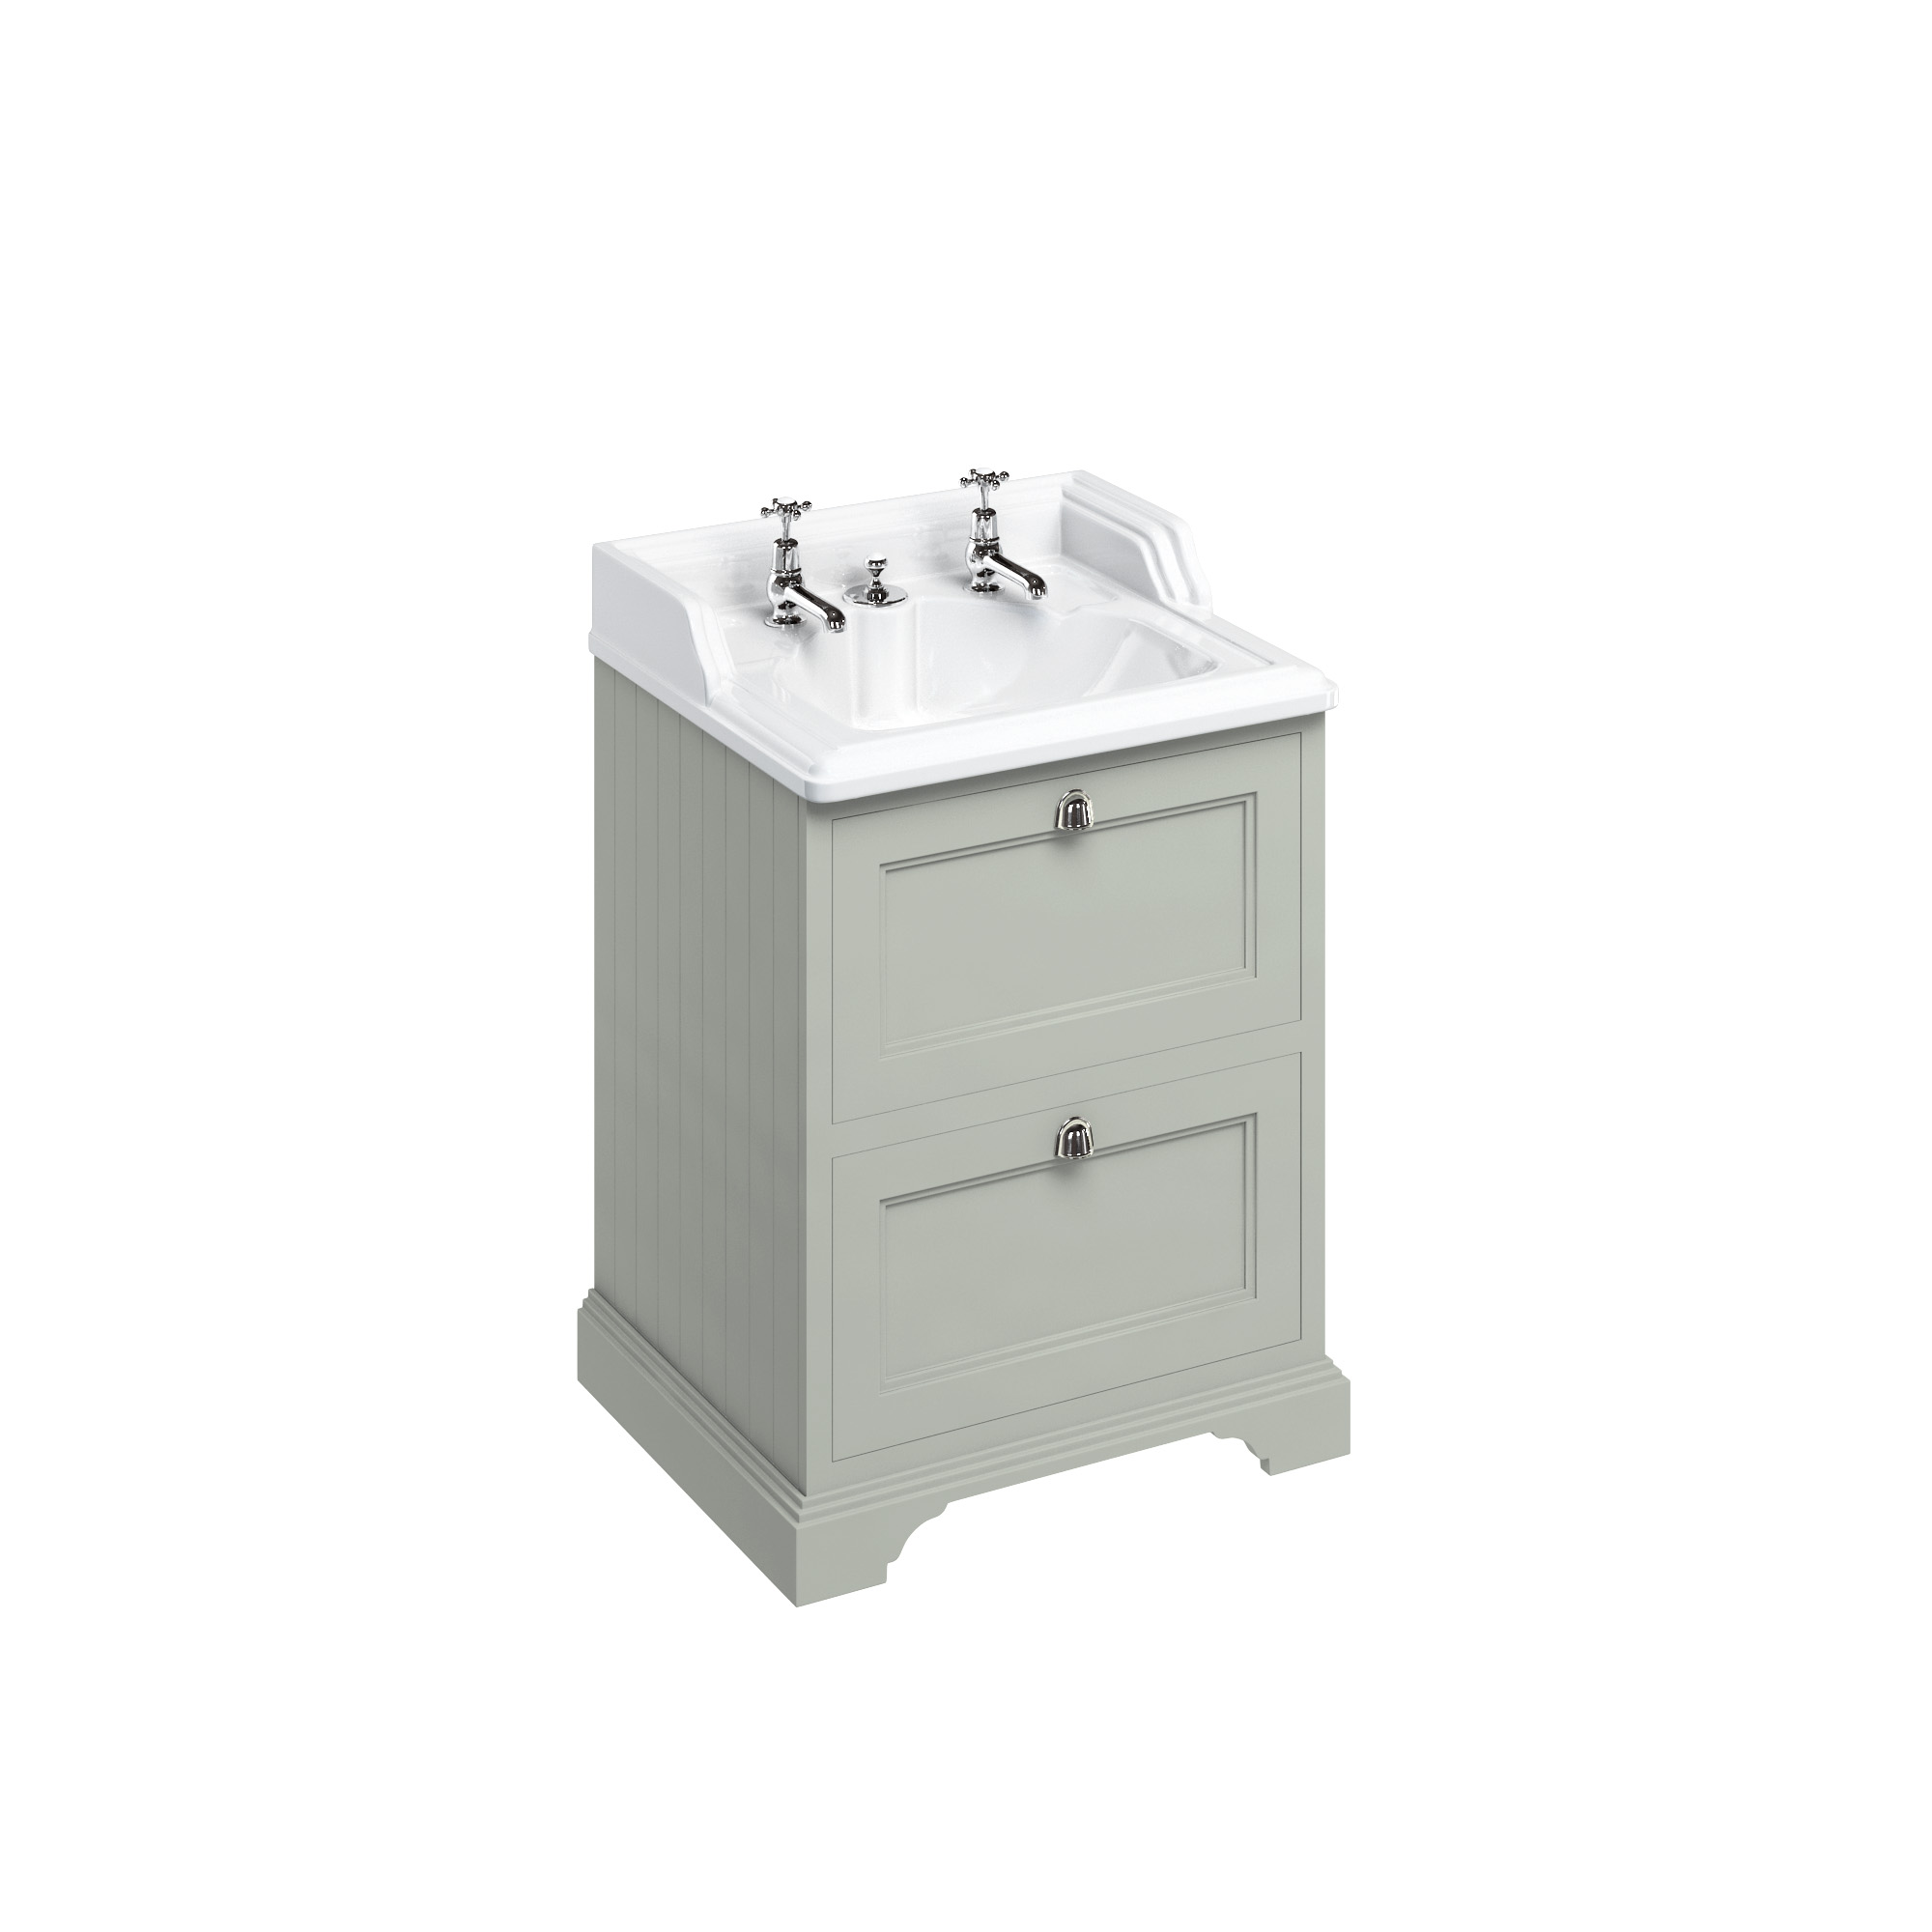 Freestanding 650 vanity unit with drawers & Classic 650 basin for integrated waste & overflow